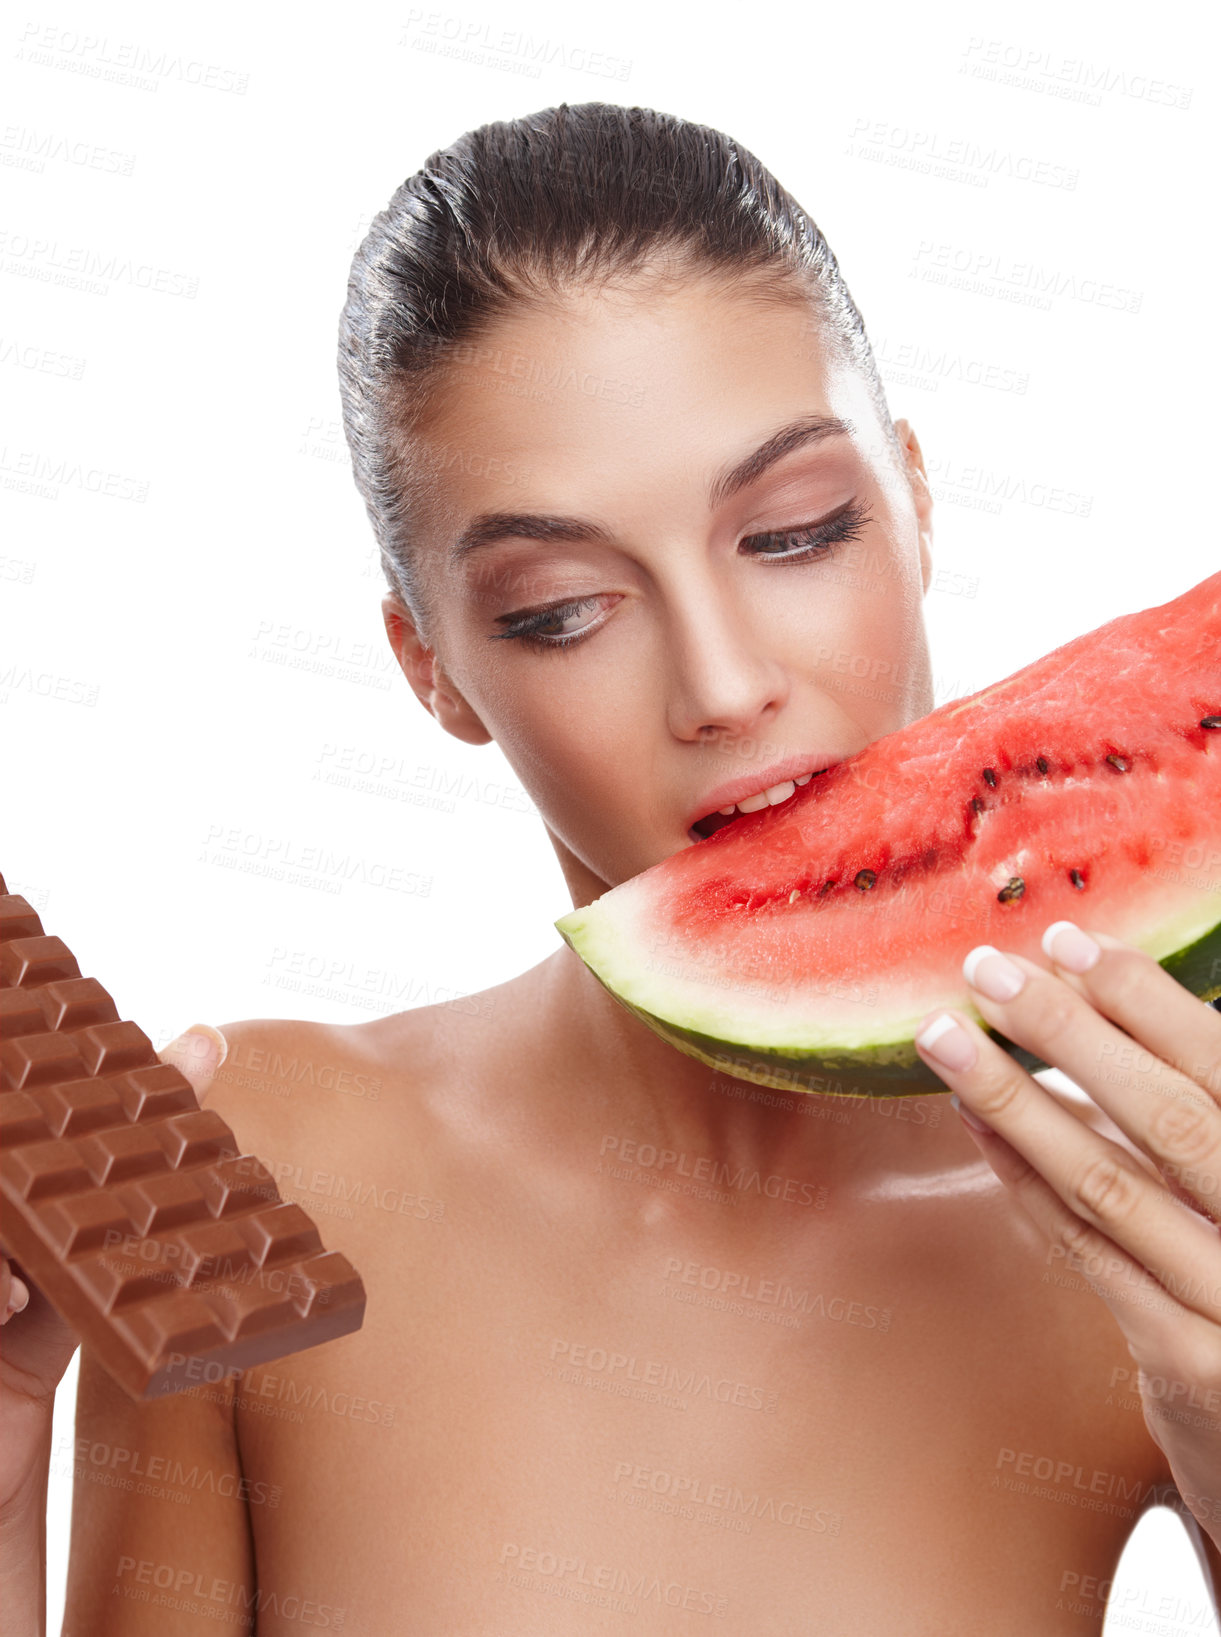 Buy stock photo Studio shot of a young woman eating a slice of watermelon while eying out a slab of chocolate